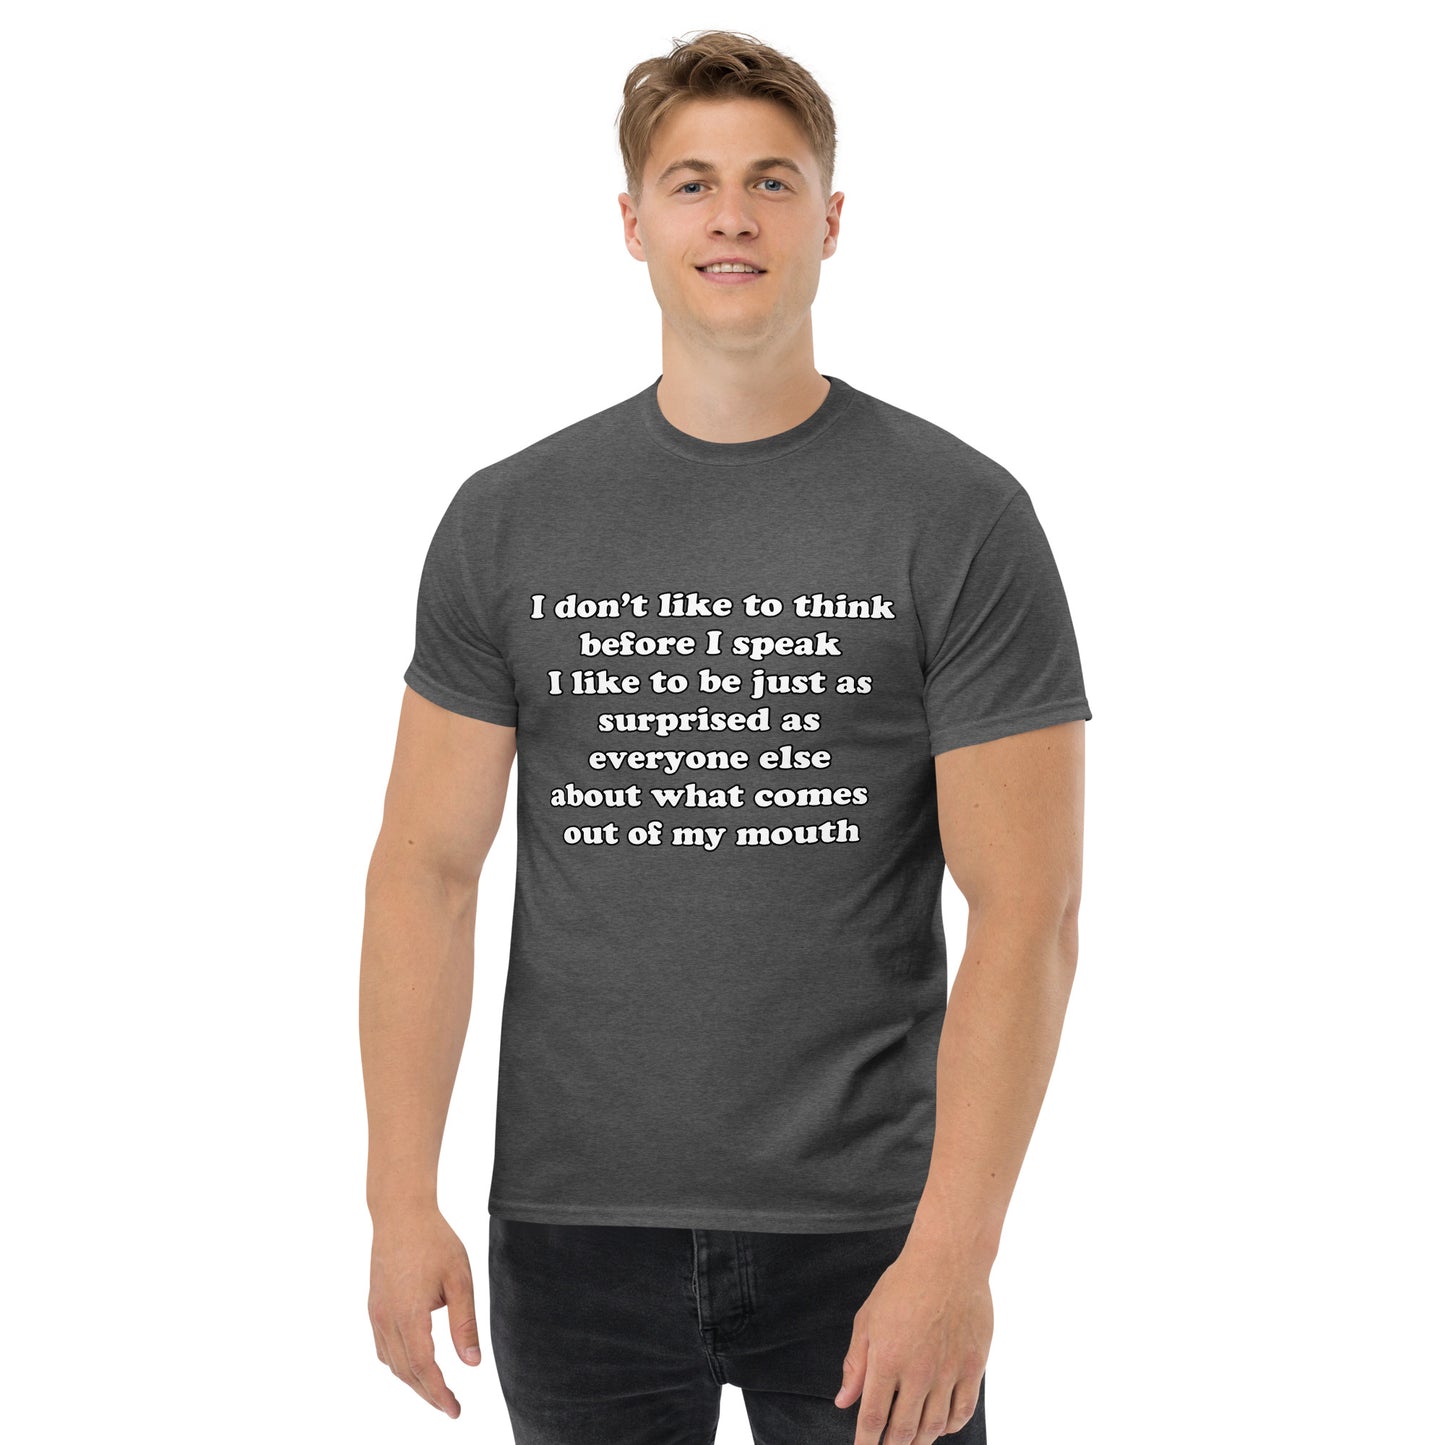 Man with dark grey t-shirt with text “I don't think before I speak Just as serprised as everyone about what comes out of my mouth"